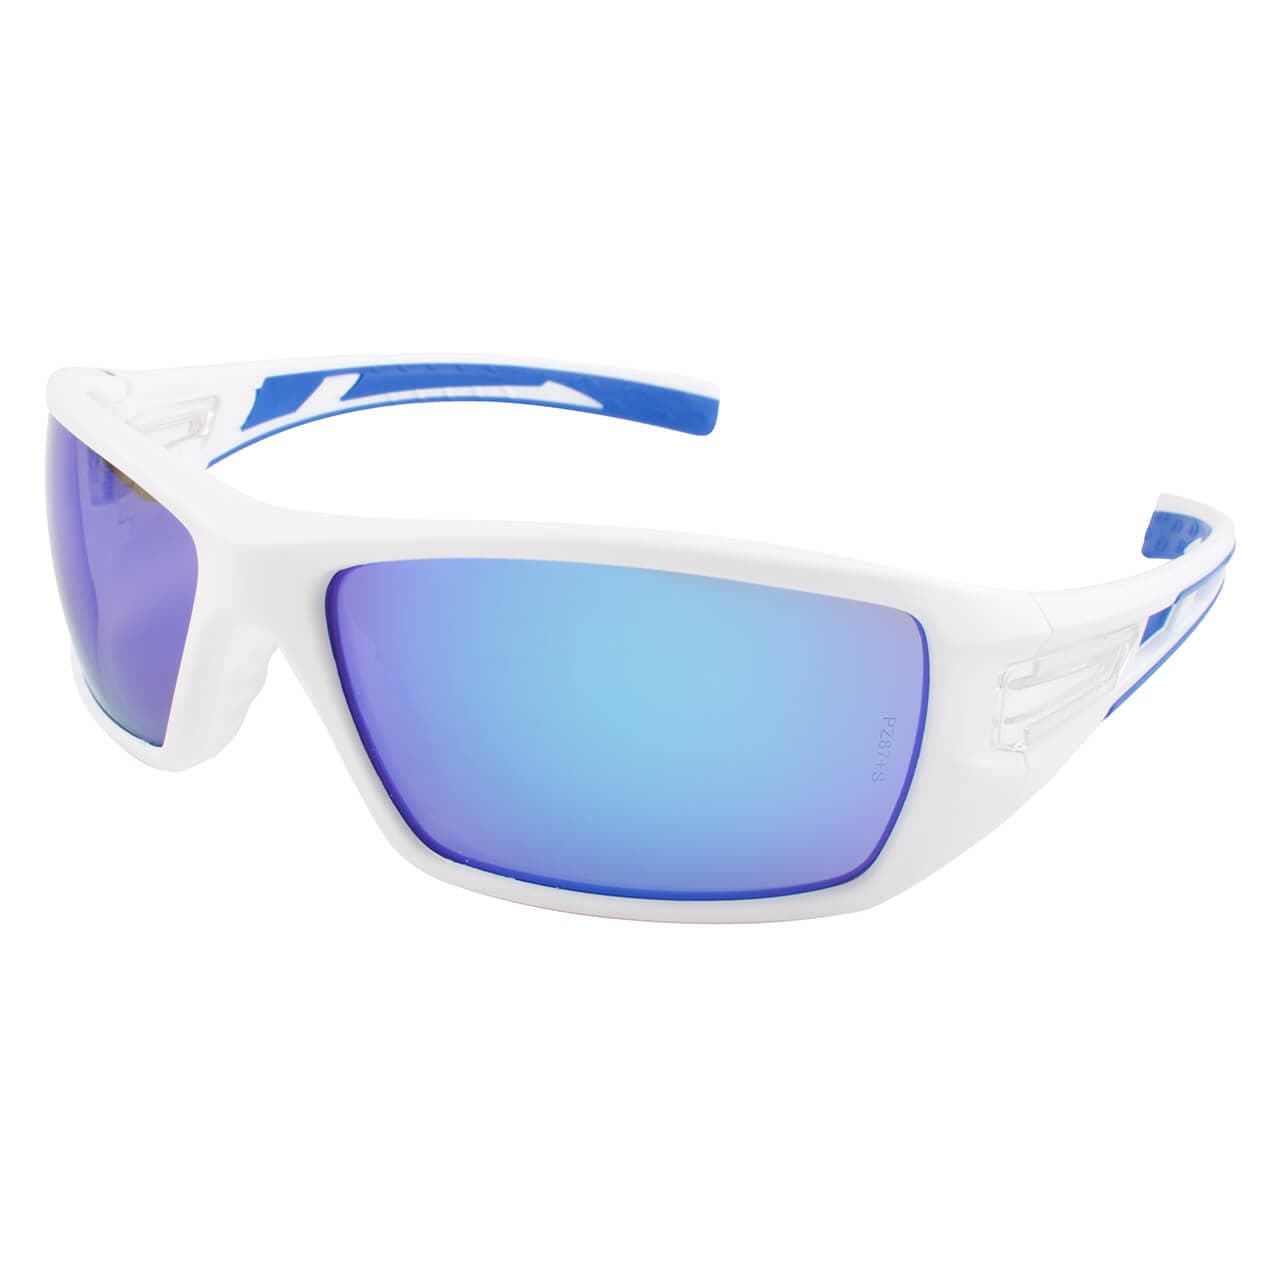 Metel M30 Safety Glasses with White Frame and Blue Mirror Lenses